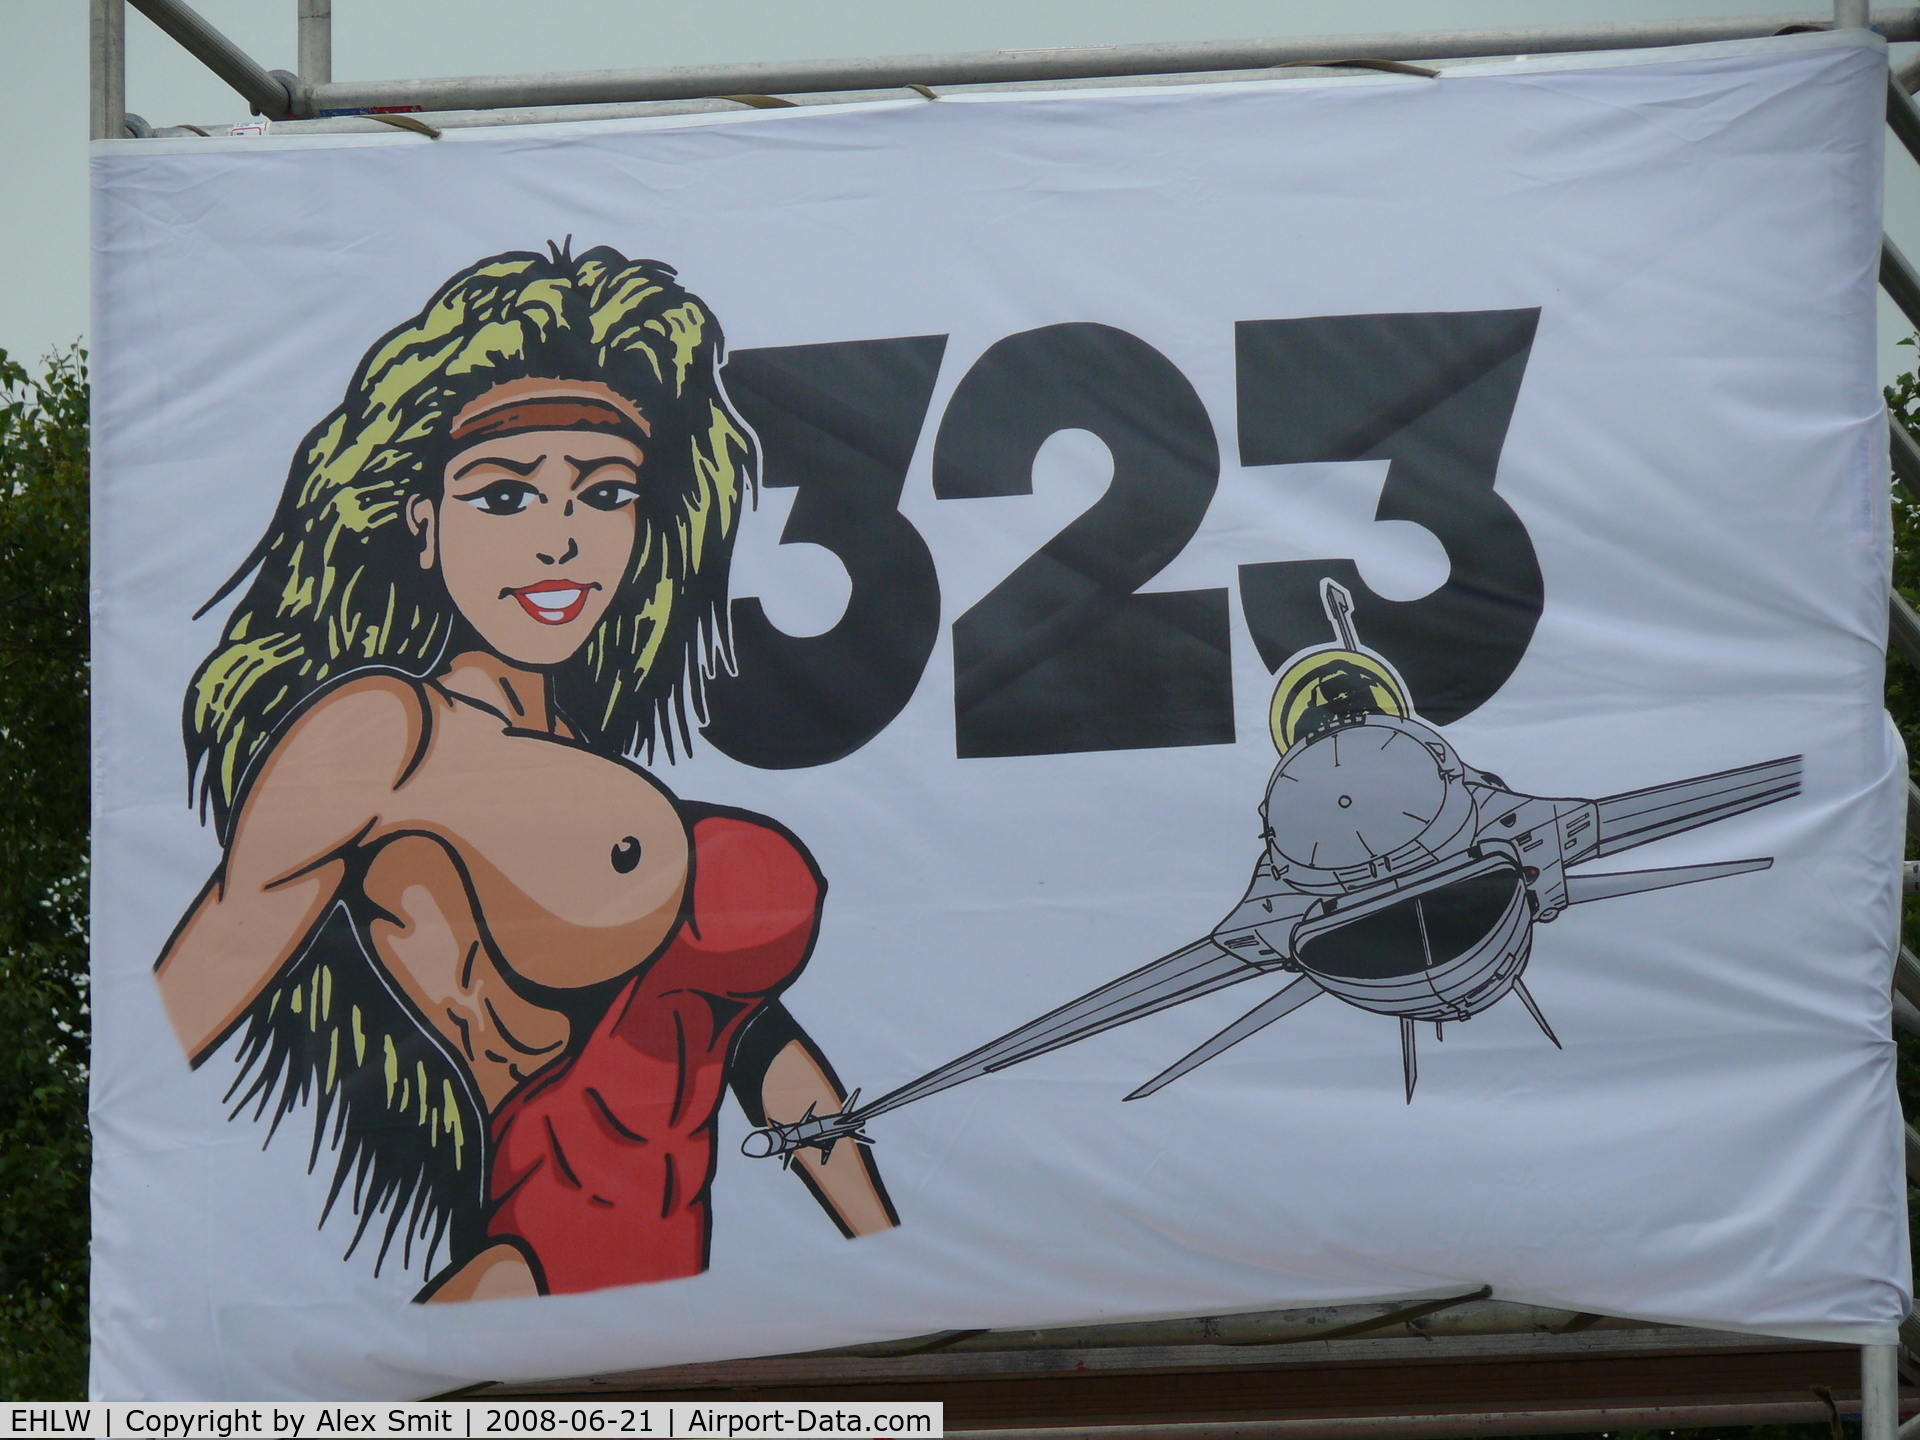 Leeuwarden Air Base Airport, Leeuwarden Netherlands (EHLW) - Goddess of the hunters Diana is in the squadron-sign of Leeuwarden based 323 Squadron, this banner was high up during the Royal Netherlands Air Force open house